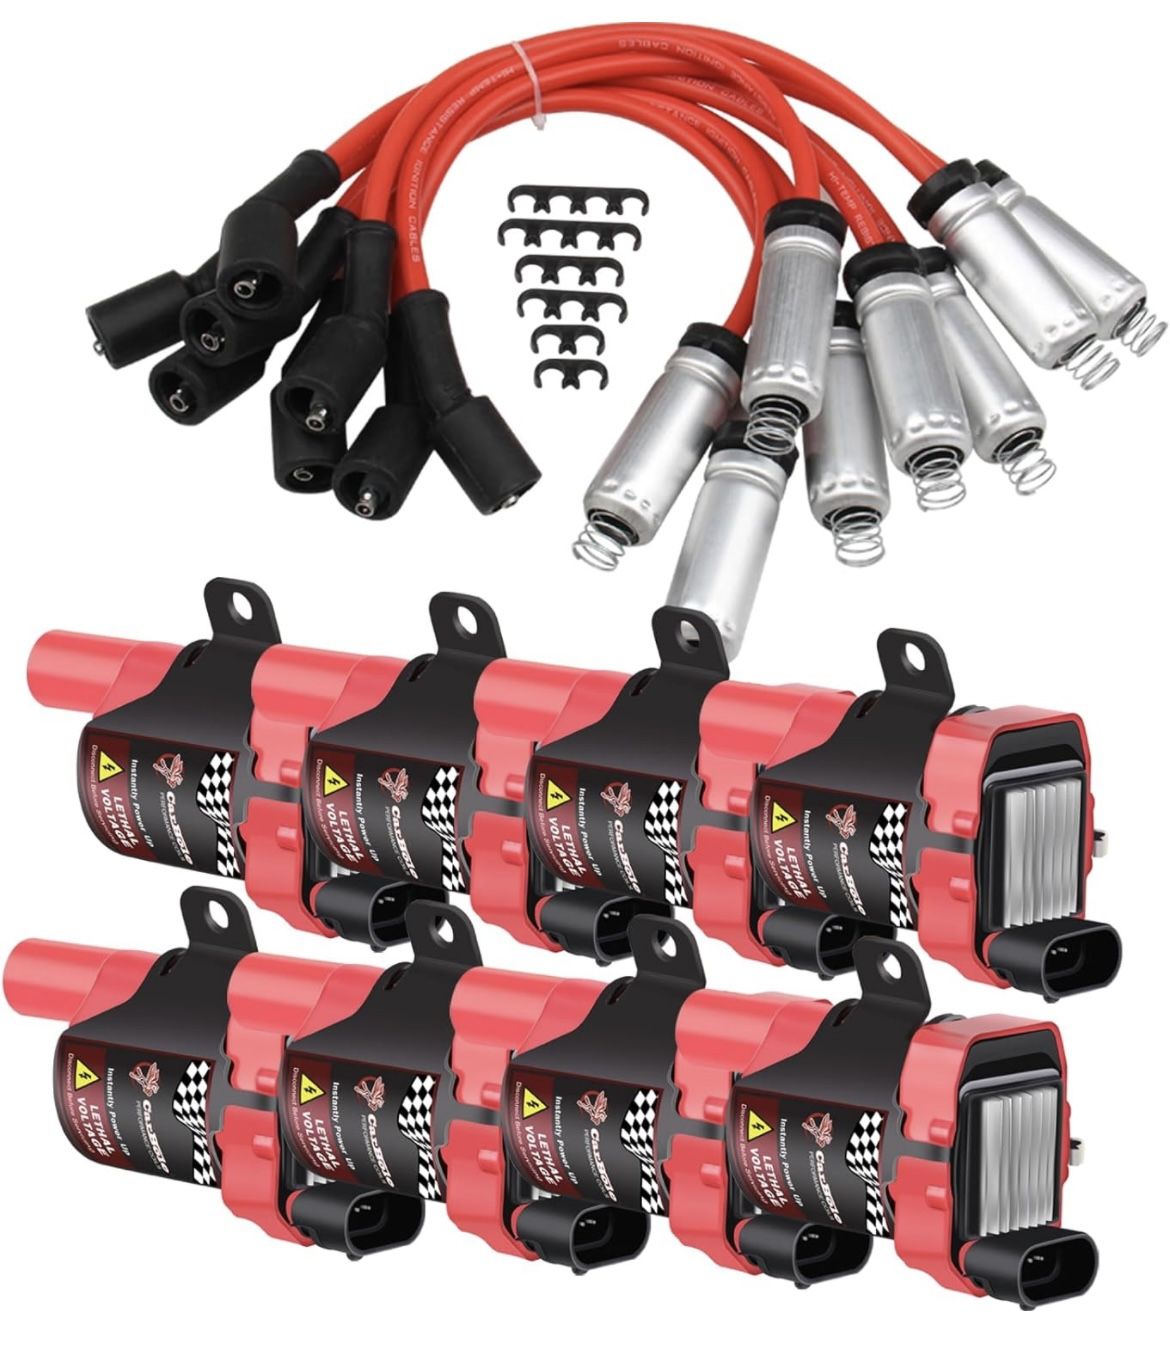 Pindex 8 Pack D585 Ignition Coils and 748UU 8mm Spark Plug Wires Compatible with Chevy Silverado GMC CADILLAC Chevrolet 